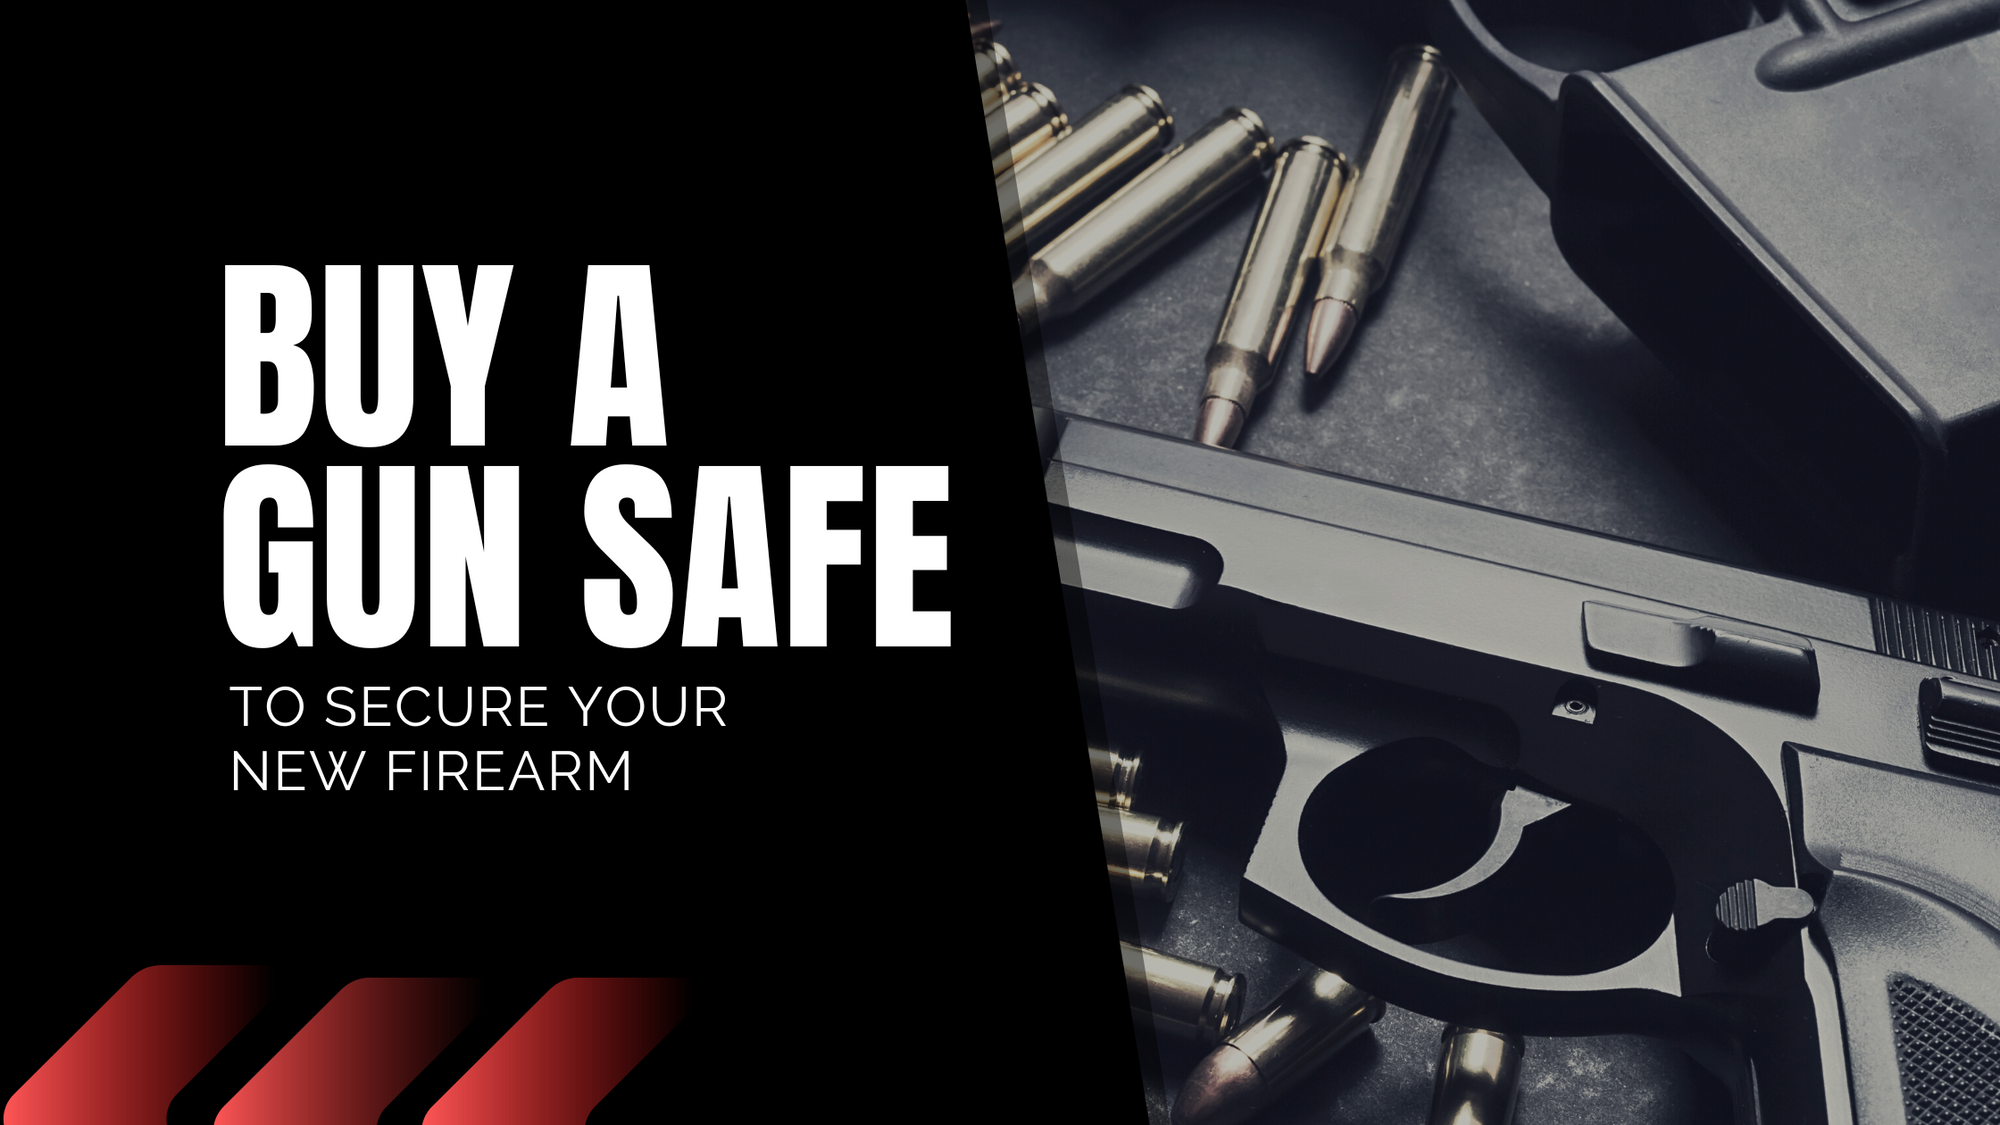 Buying the right gun safe can be challenging when you're not sure where to start. To help you out, we've compiled the top four most frequently asked questions about gun safes and answered them